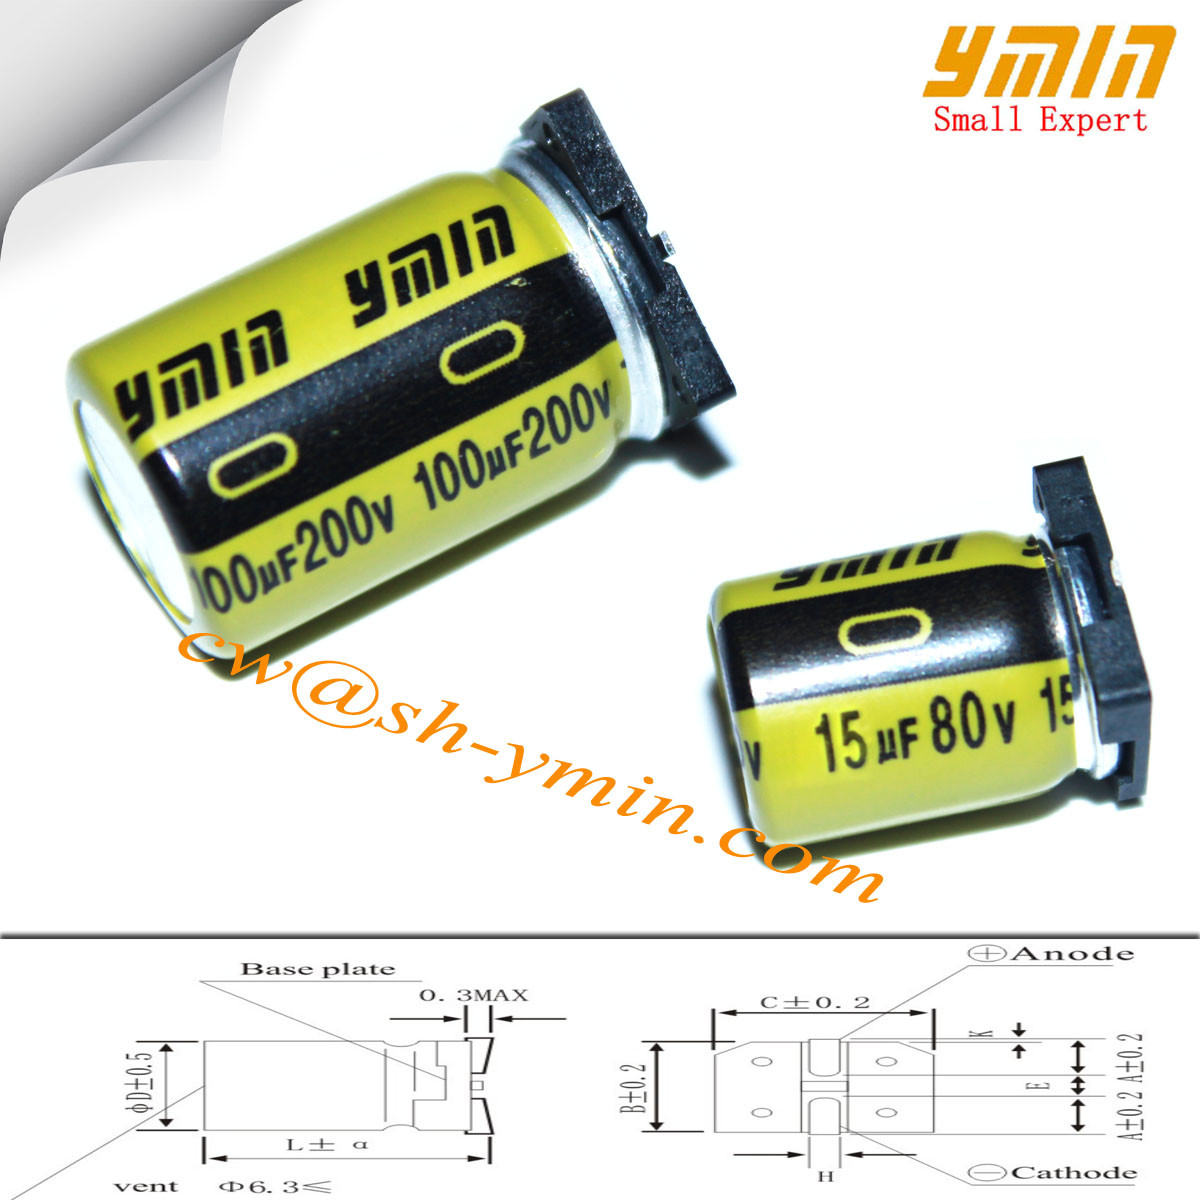  15uF 80V 5x10mm SMD Capacitors VKM Series 105°C 7,000 ~ 10,000 Hours SMD Aluminum Electrolytic Capacitor  RoHS Manufactures